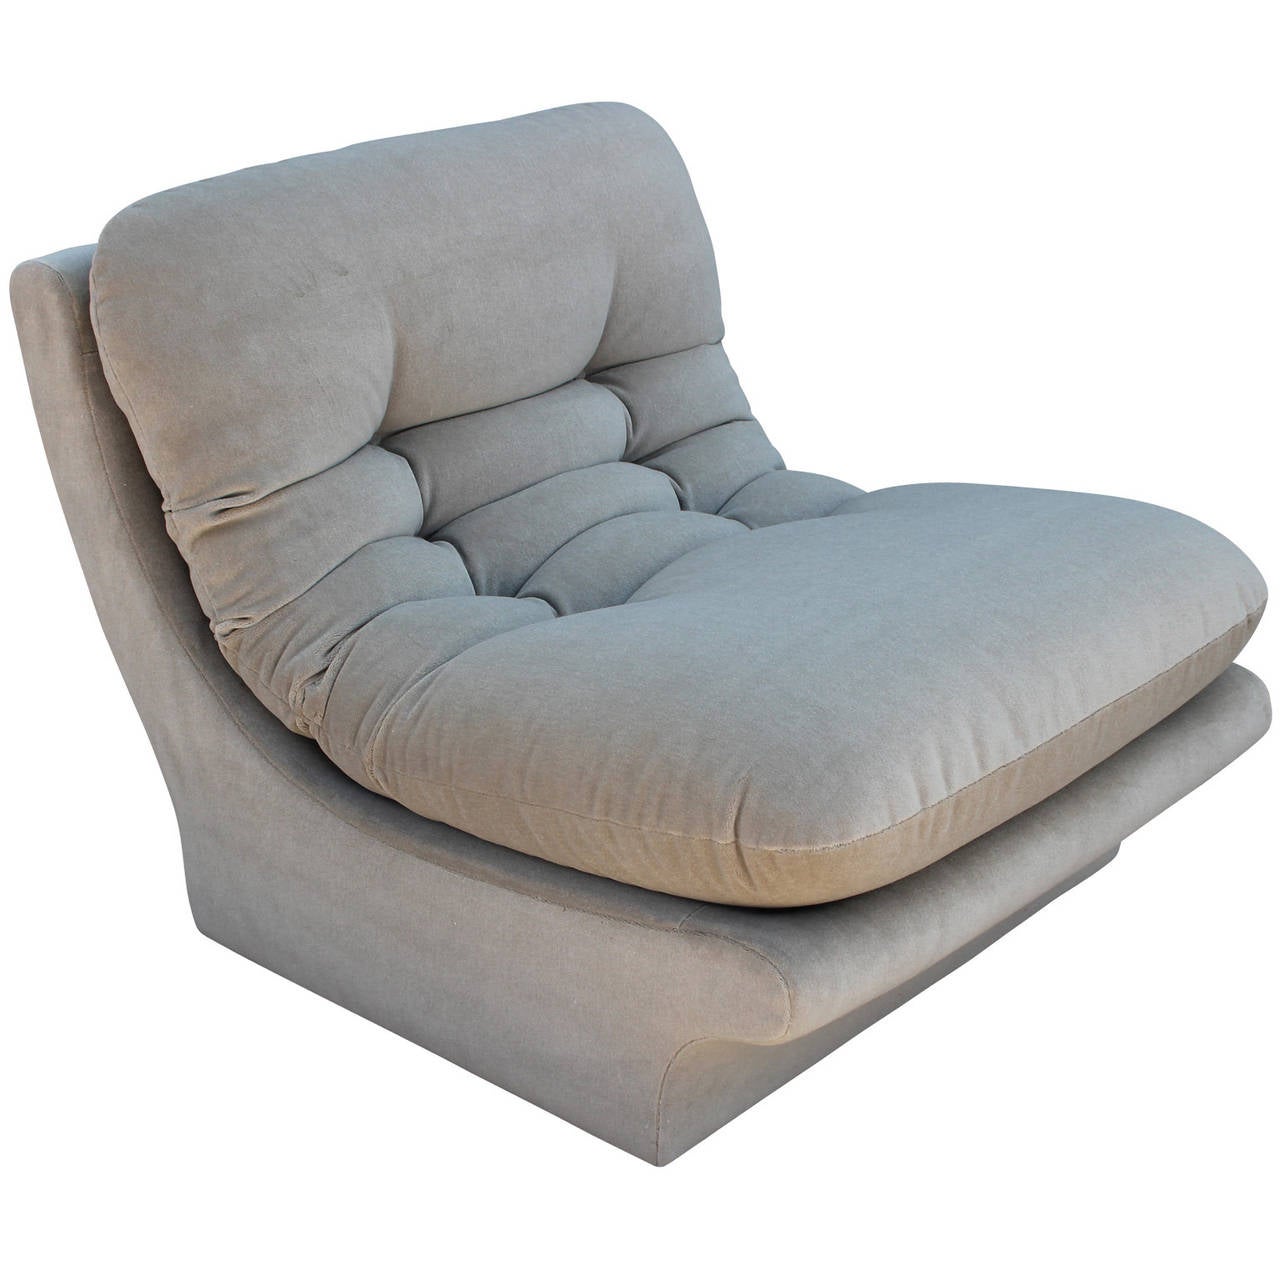 Beautiful pair of Sculptural Vladimir Kagan style chairs by Directional slipper lounge chairs upholstered in a neutral mohair. Scooped chairs are extremely comfortable. Cushions have beep box tufts. Chairs can be pushed together to form a love seat.